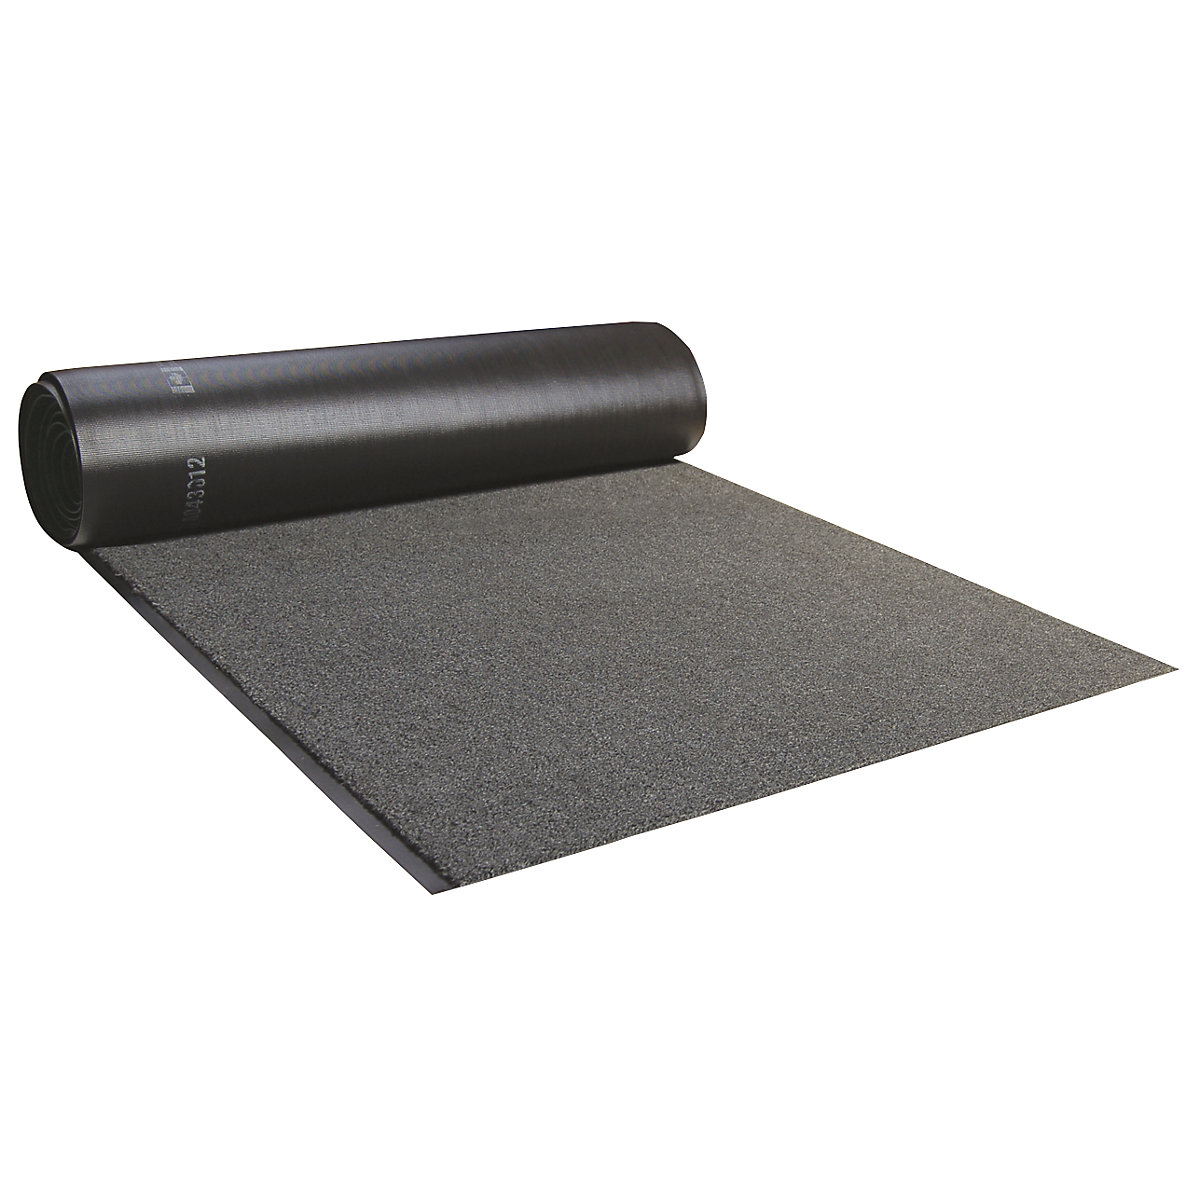 EAZYCARE AQUA entrance matting, width 1200 mm, sold by the metre, grey